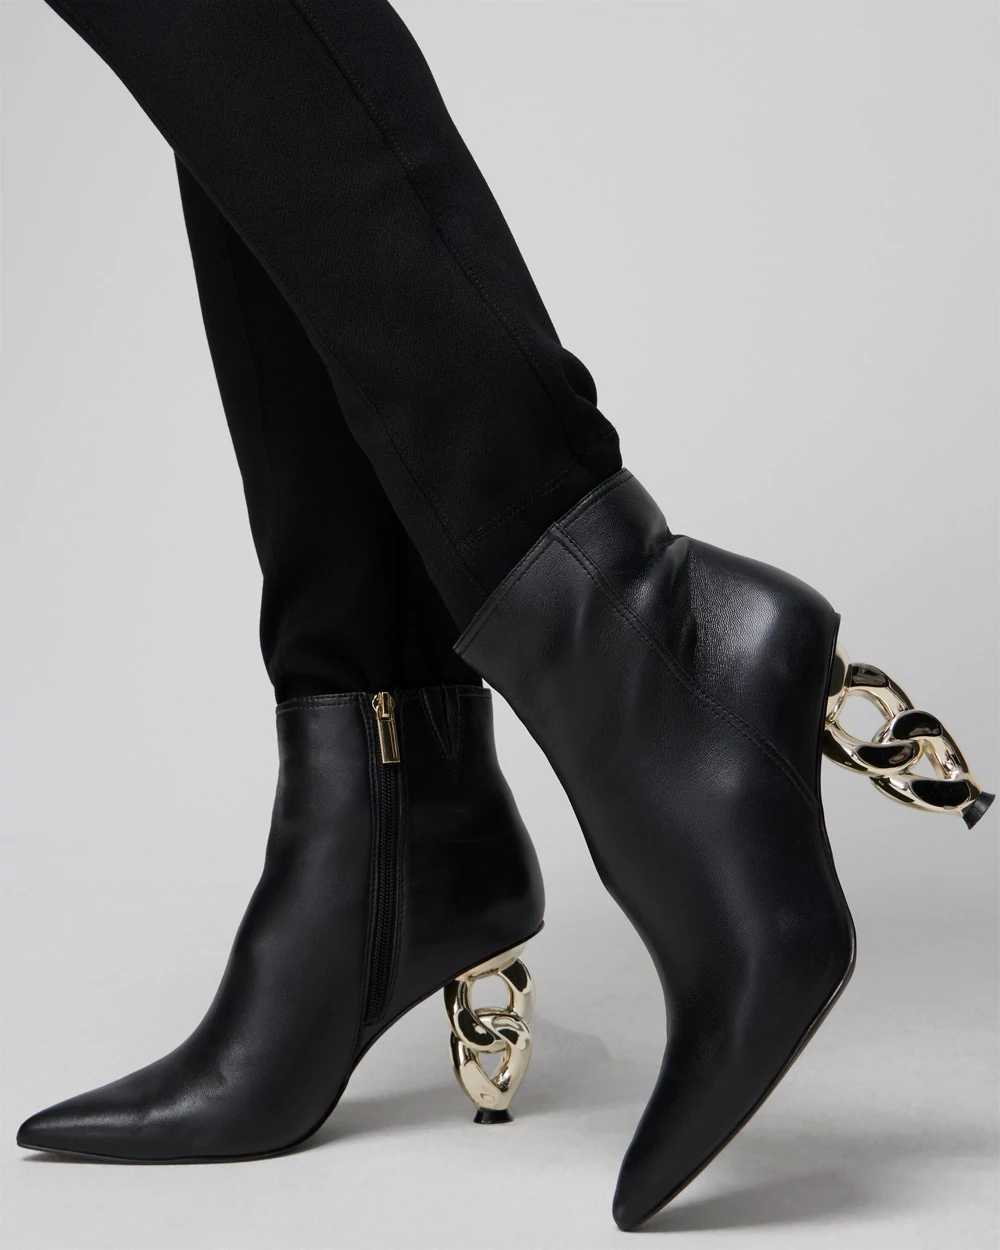 Leather Chain Heeled Bootie click to view larger image.